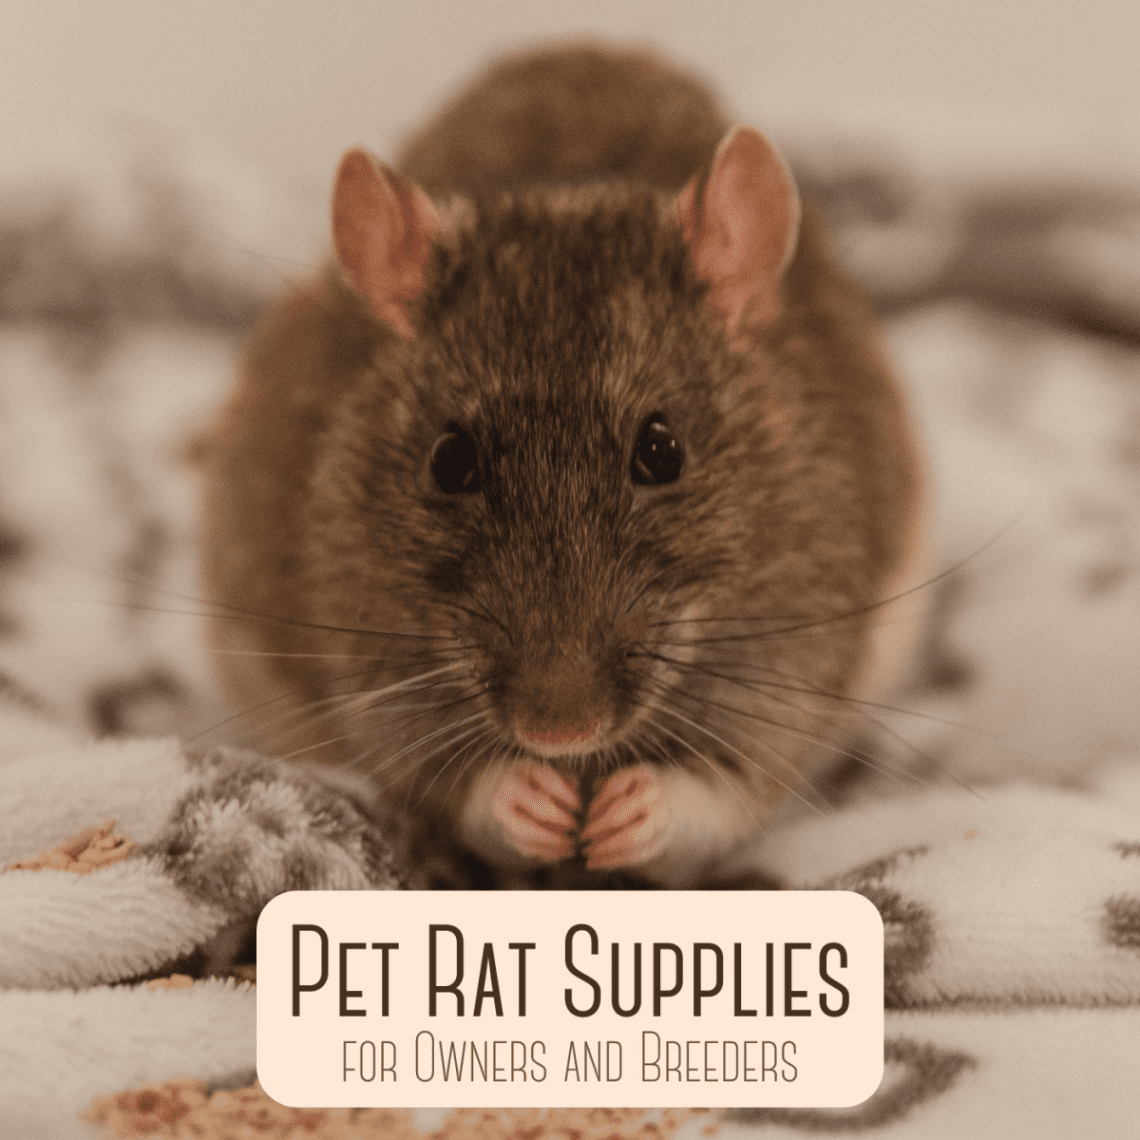 A drinking bowl, clothes, a carrier and a ball for a rat &#8211; do a rodent need such accessories?